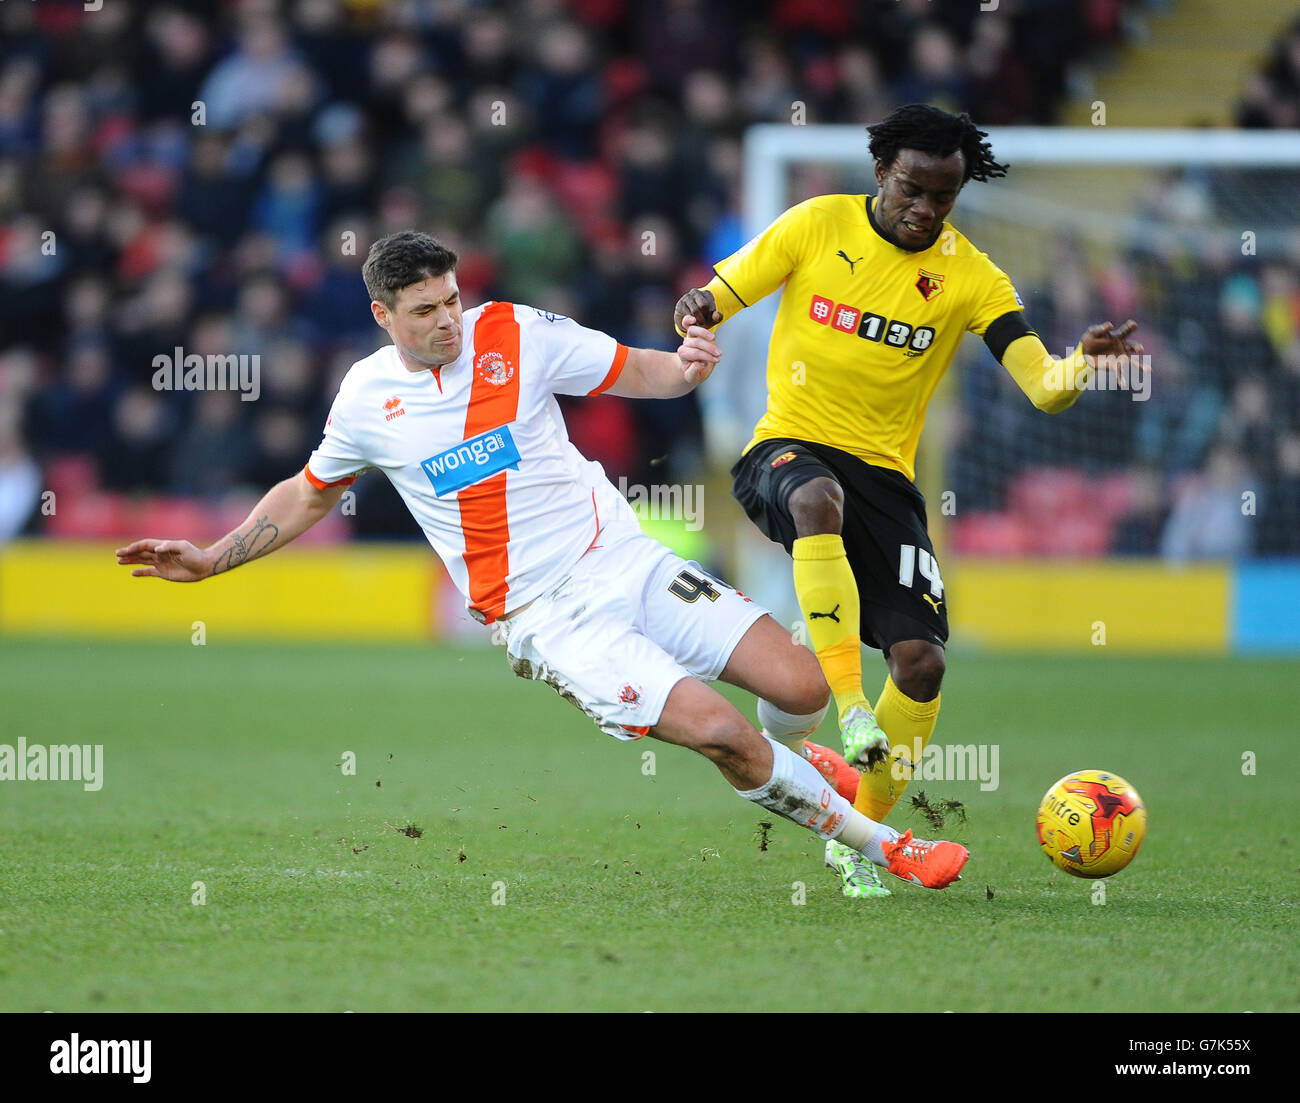 Watford's Juan Carlos Paredes (right) is tackled by Blackpool's Darren O'Dea Stock Photo